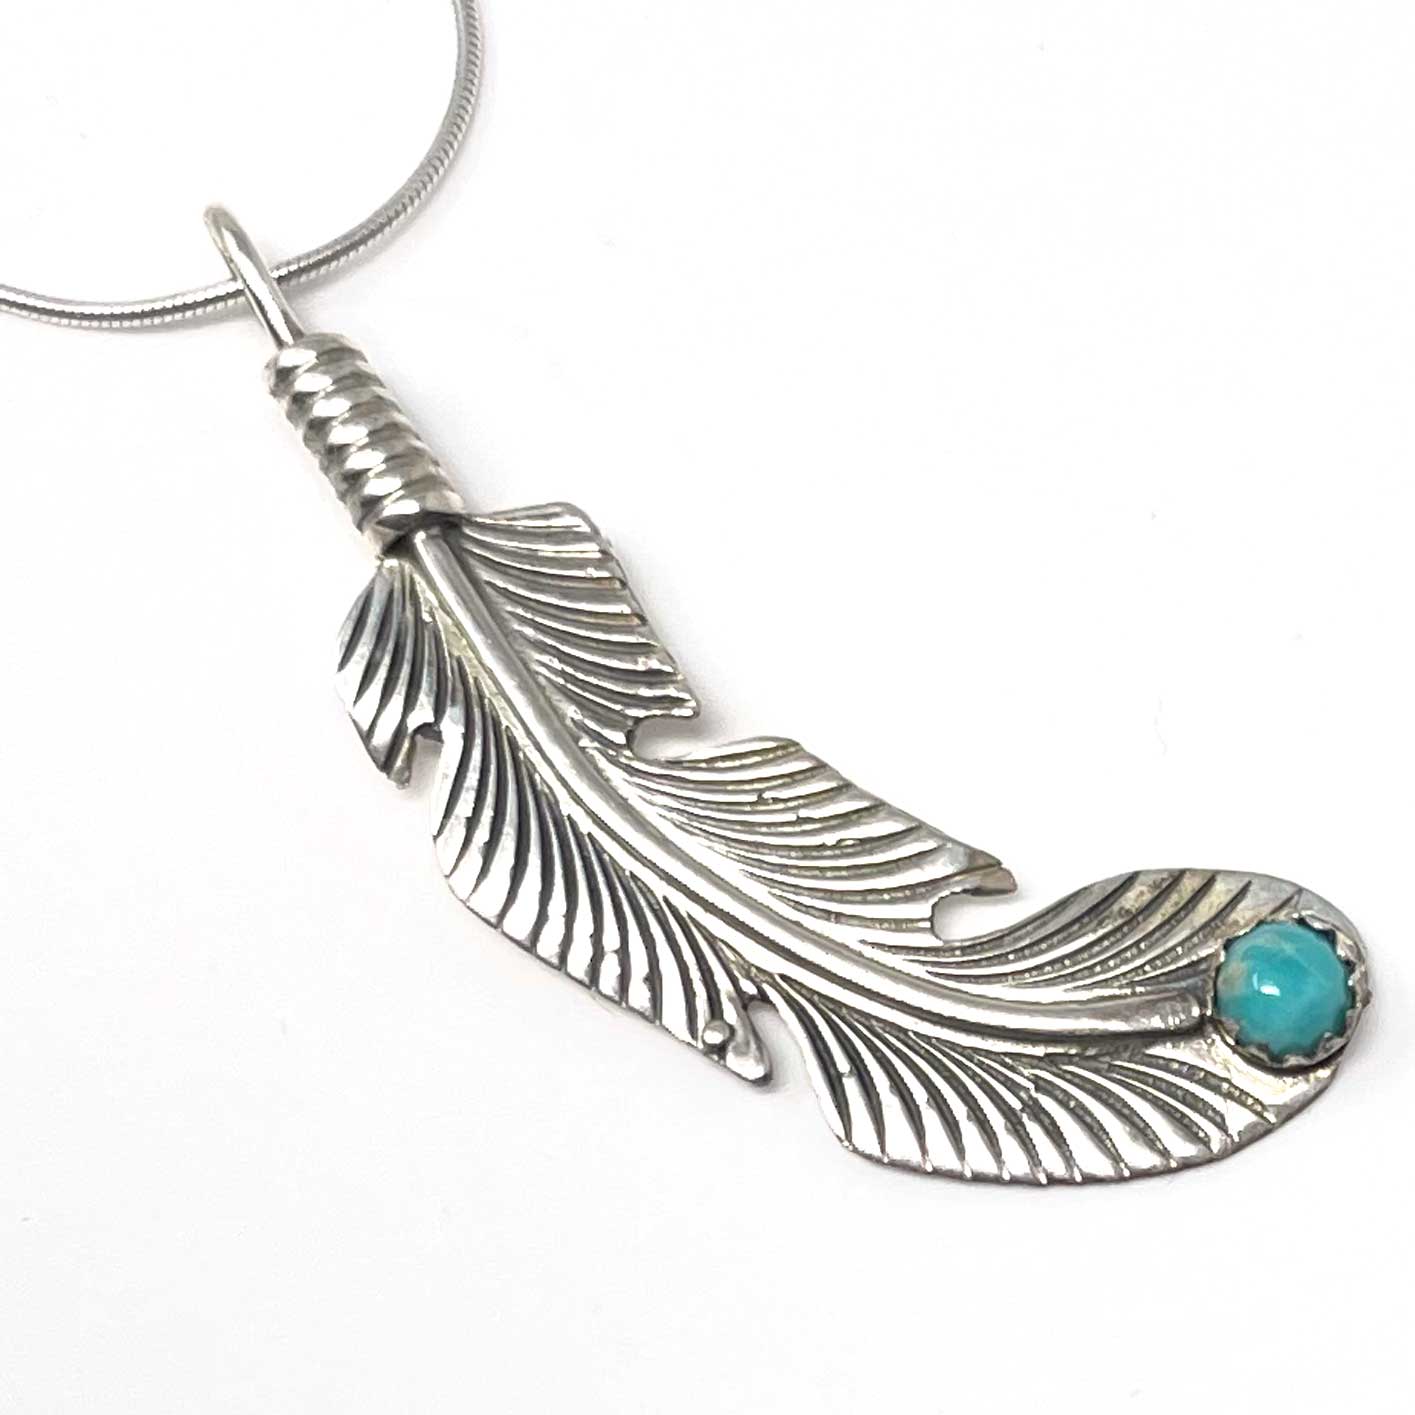 Silver & Turquoise Feather Necklace by Louise Joe